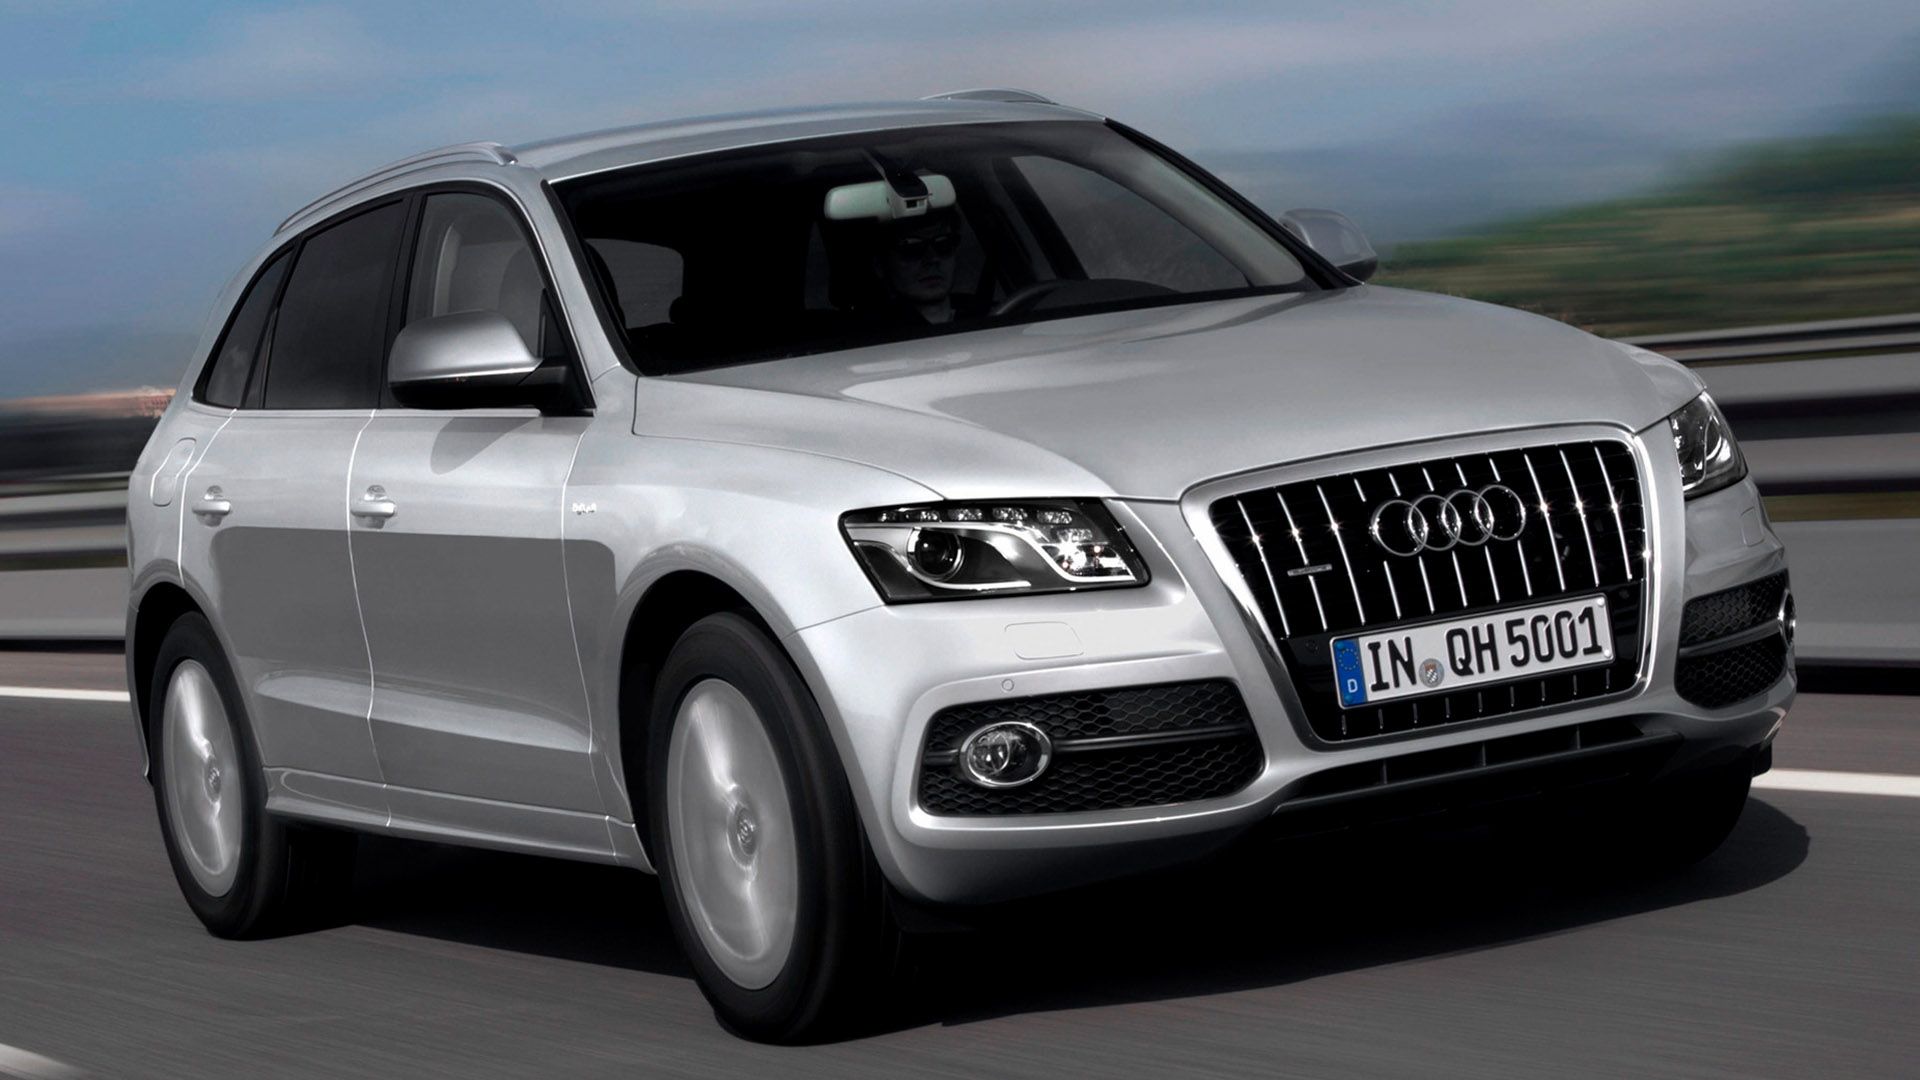 Silver Audi Q5 Hybrid on the road